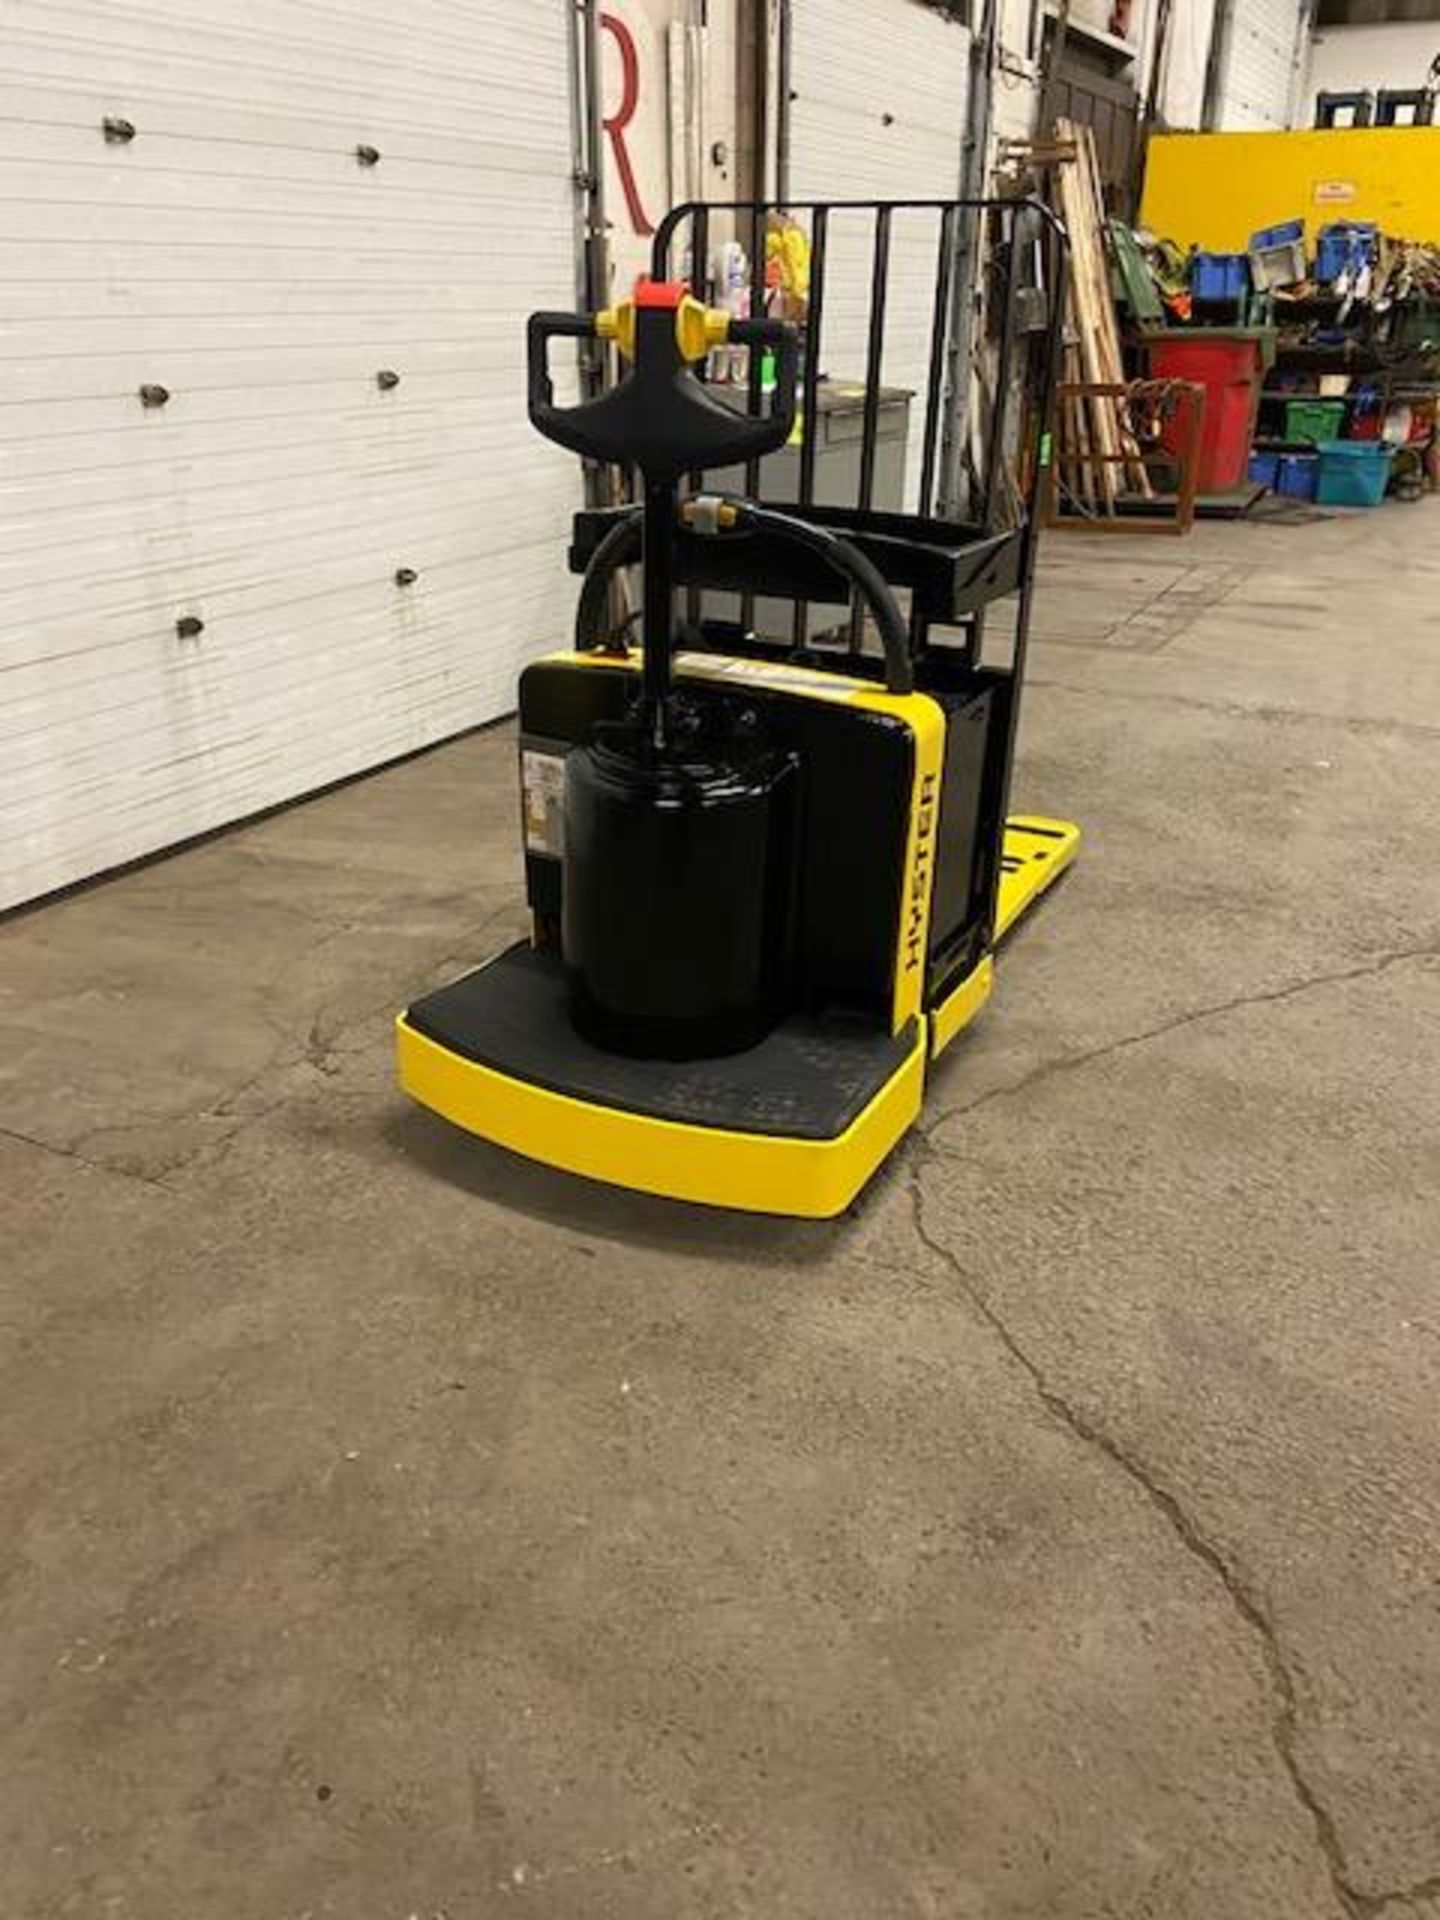 2005 Hyster Ride On Electric Powered Pallet Cart Walkie Lift 6000lbs capacity MINT - Image 3 of 3